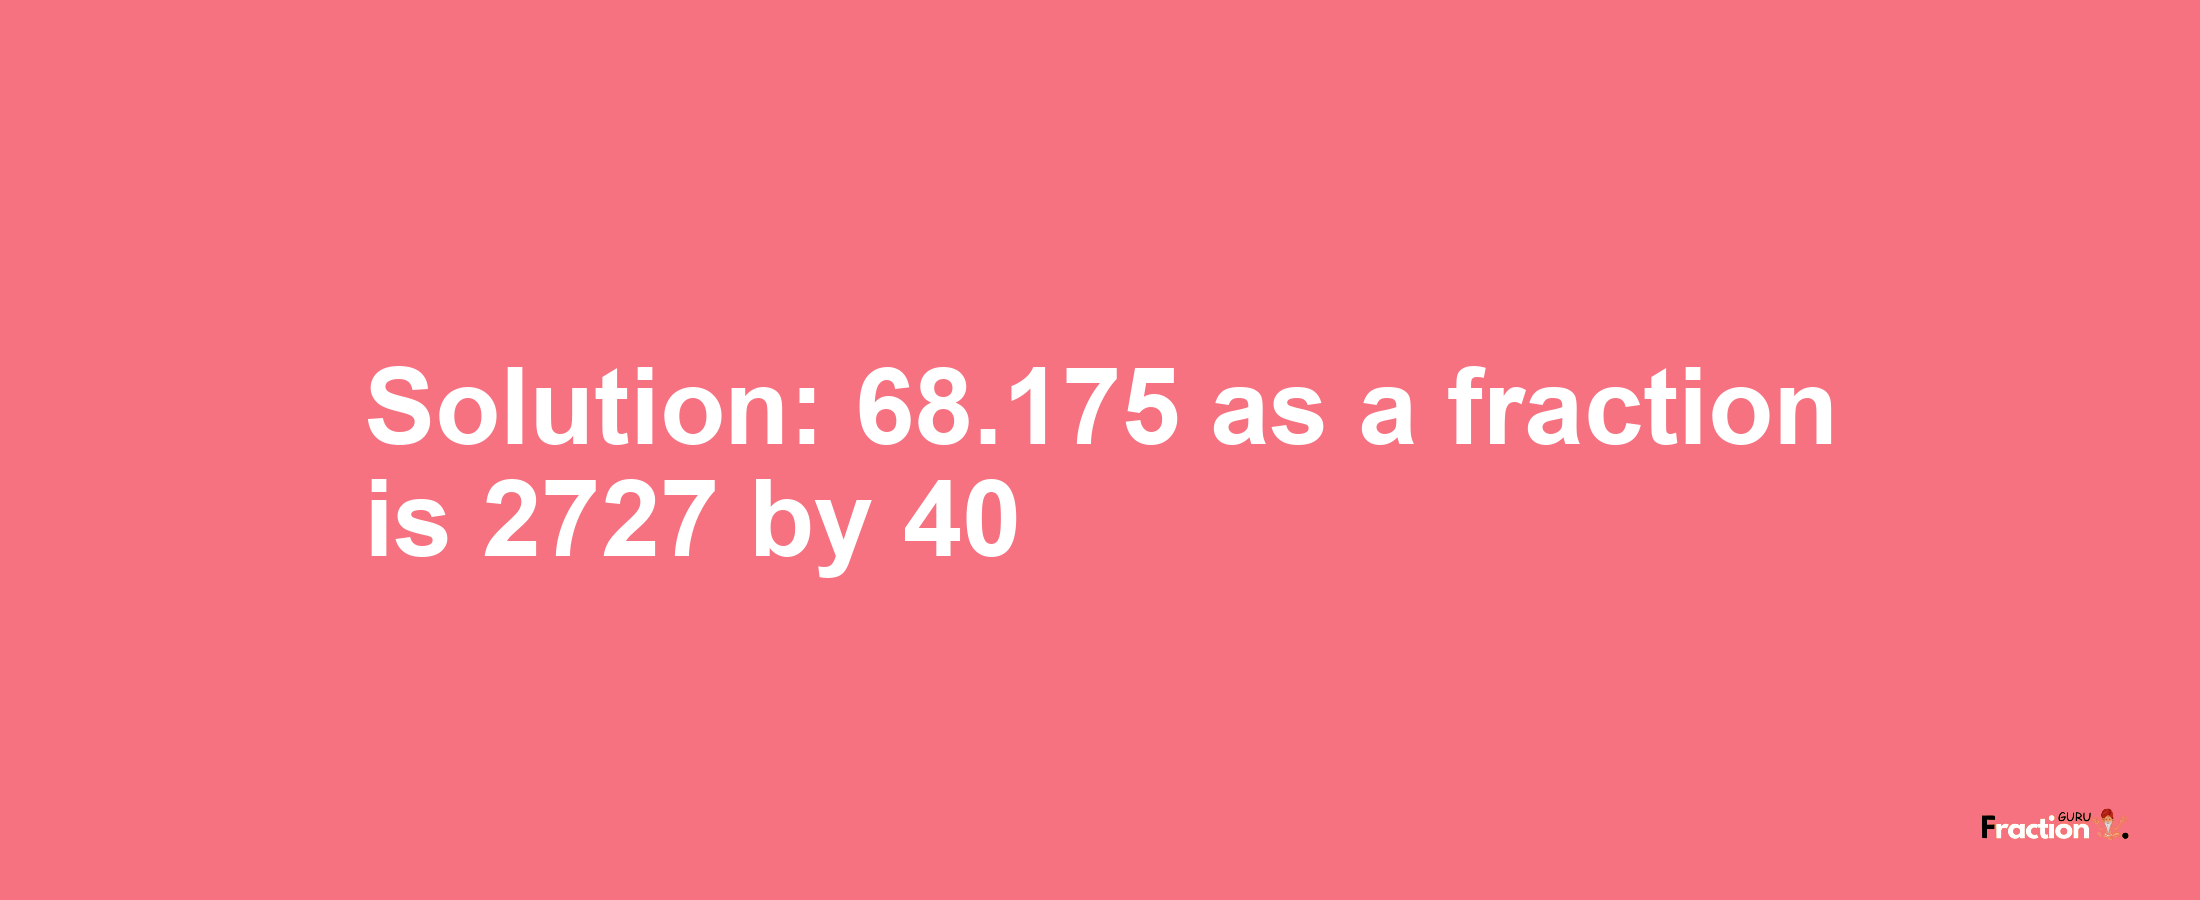 Solution:68.175 as a fraction is 2727/40